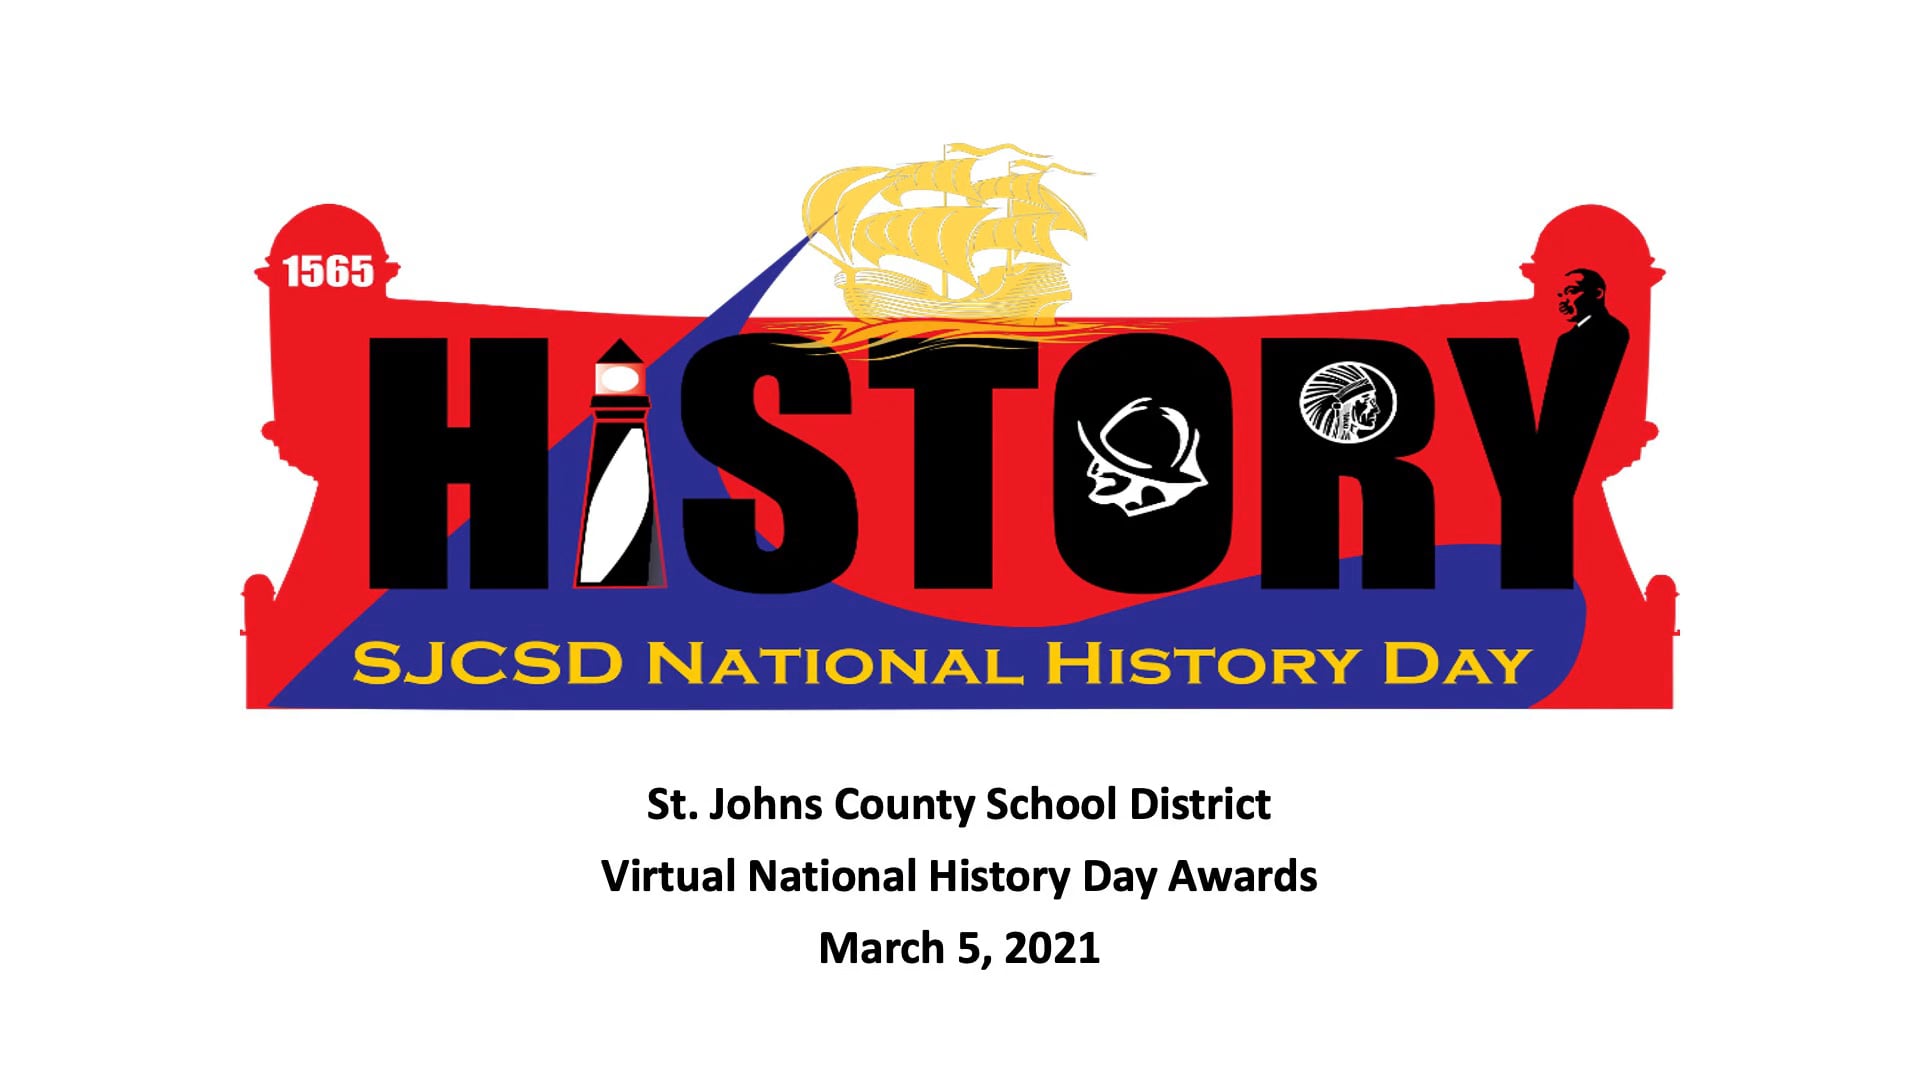 National History Day Awards - March 5, 2021